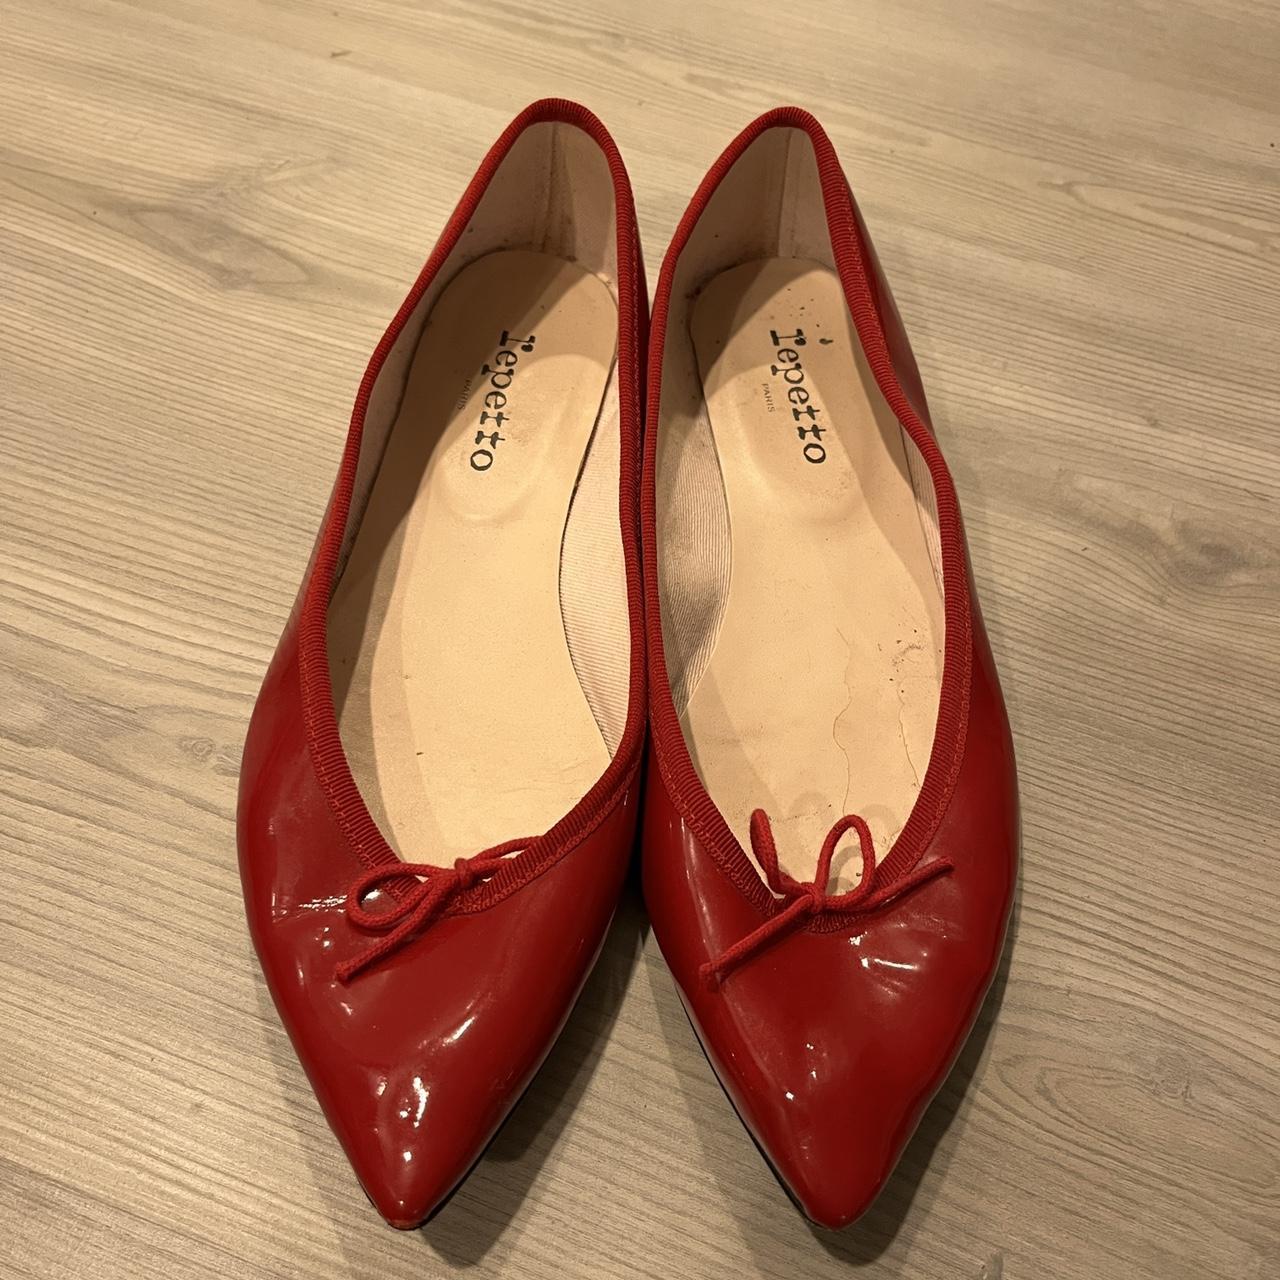 Repetto Brigitte flats in red, size 41 Barely worn!... - Depop